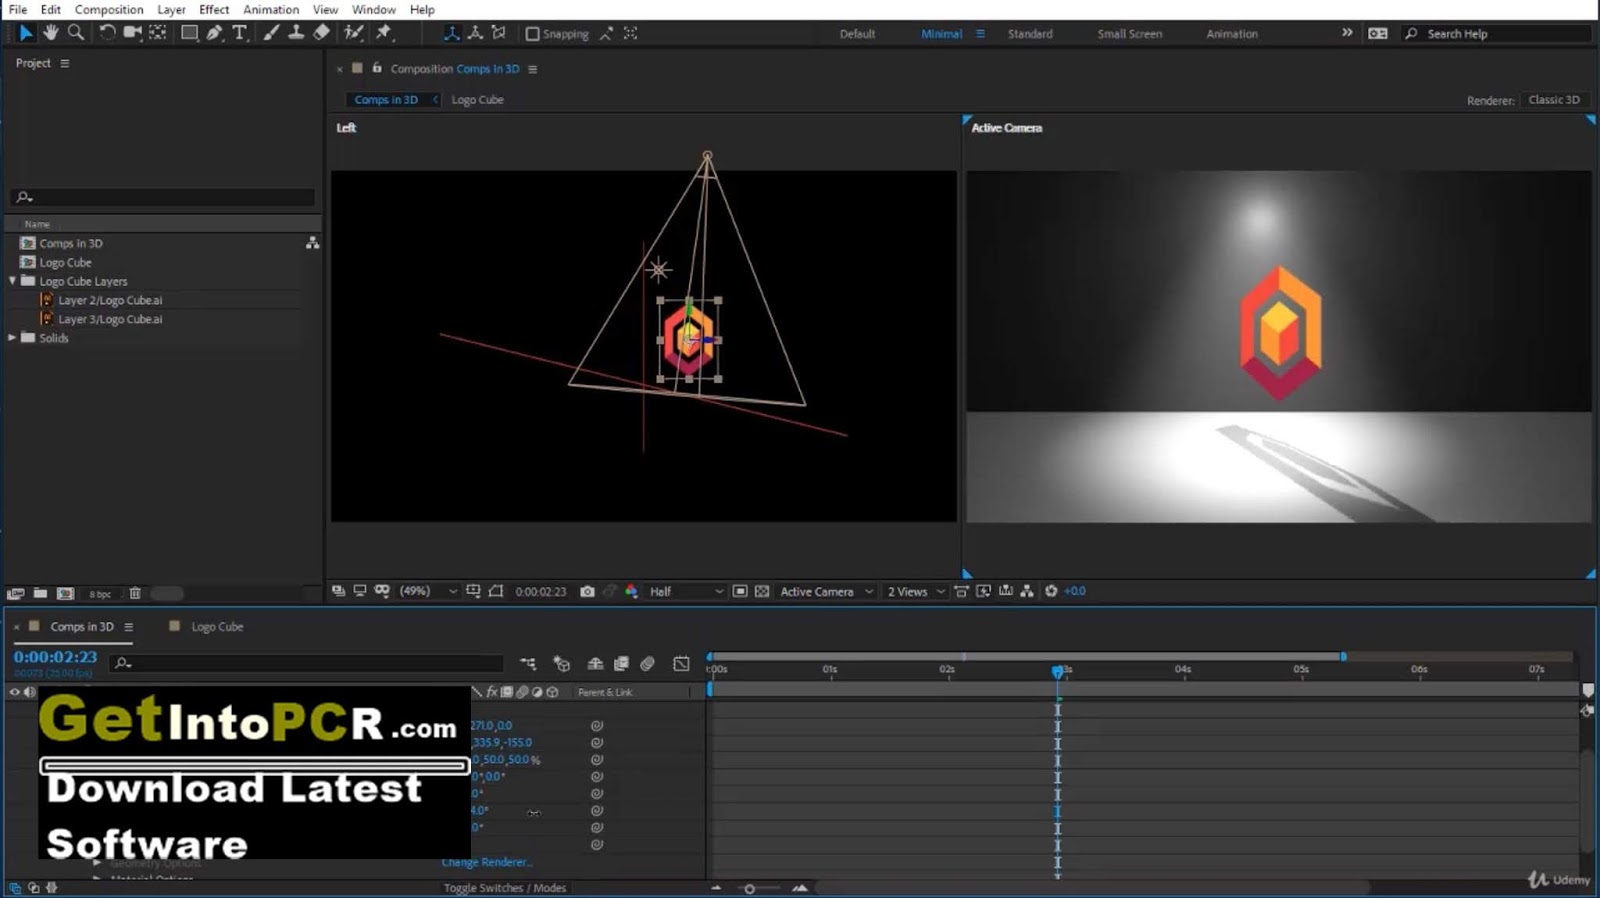 after effects free download full version pc